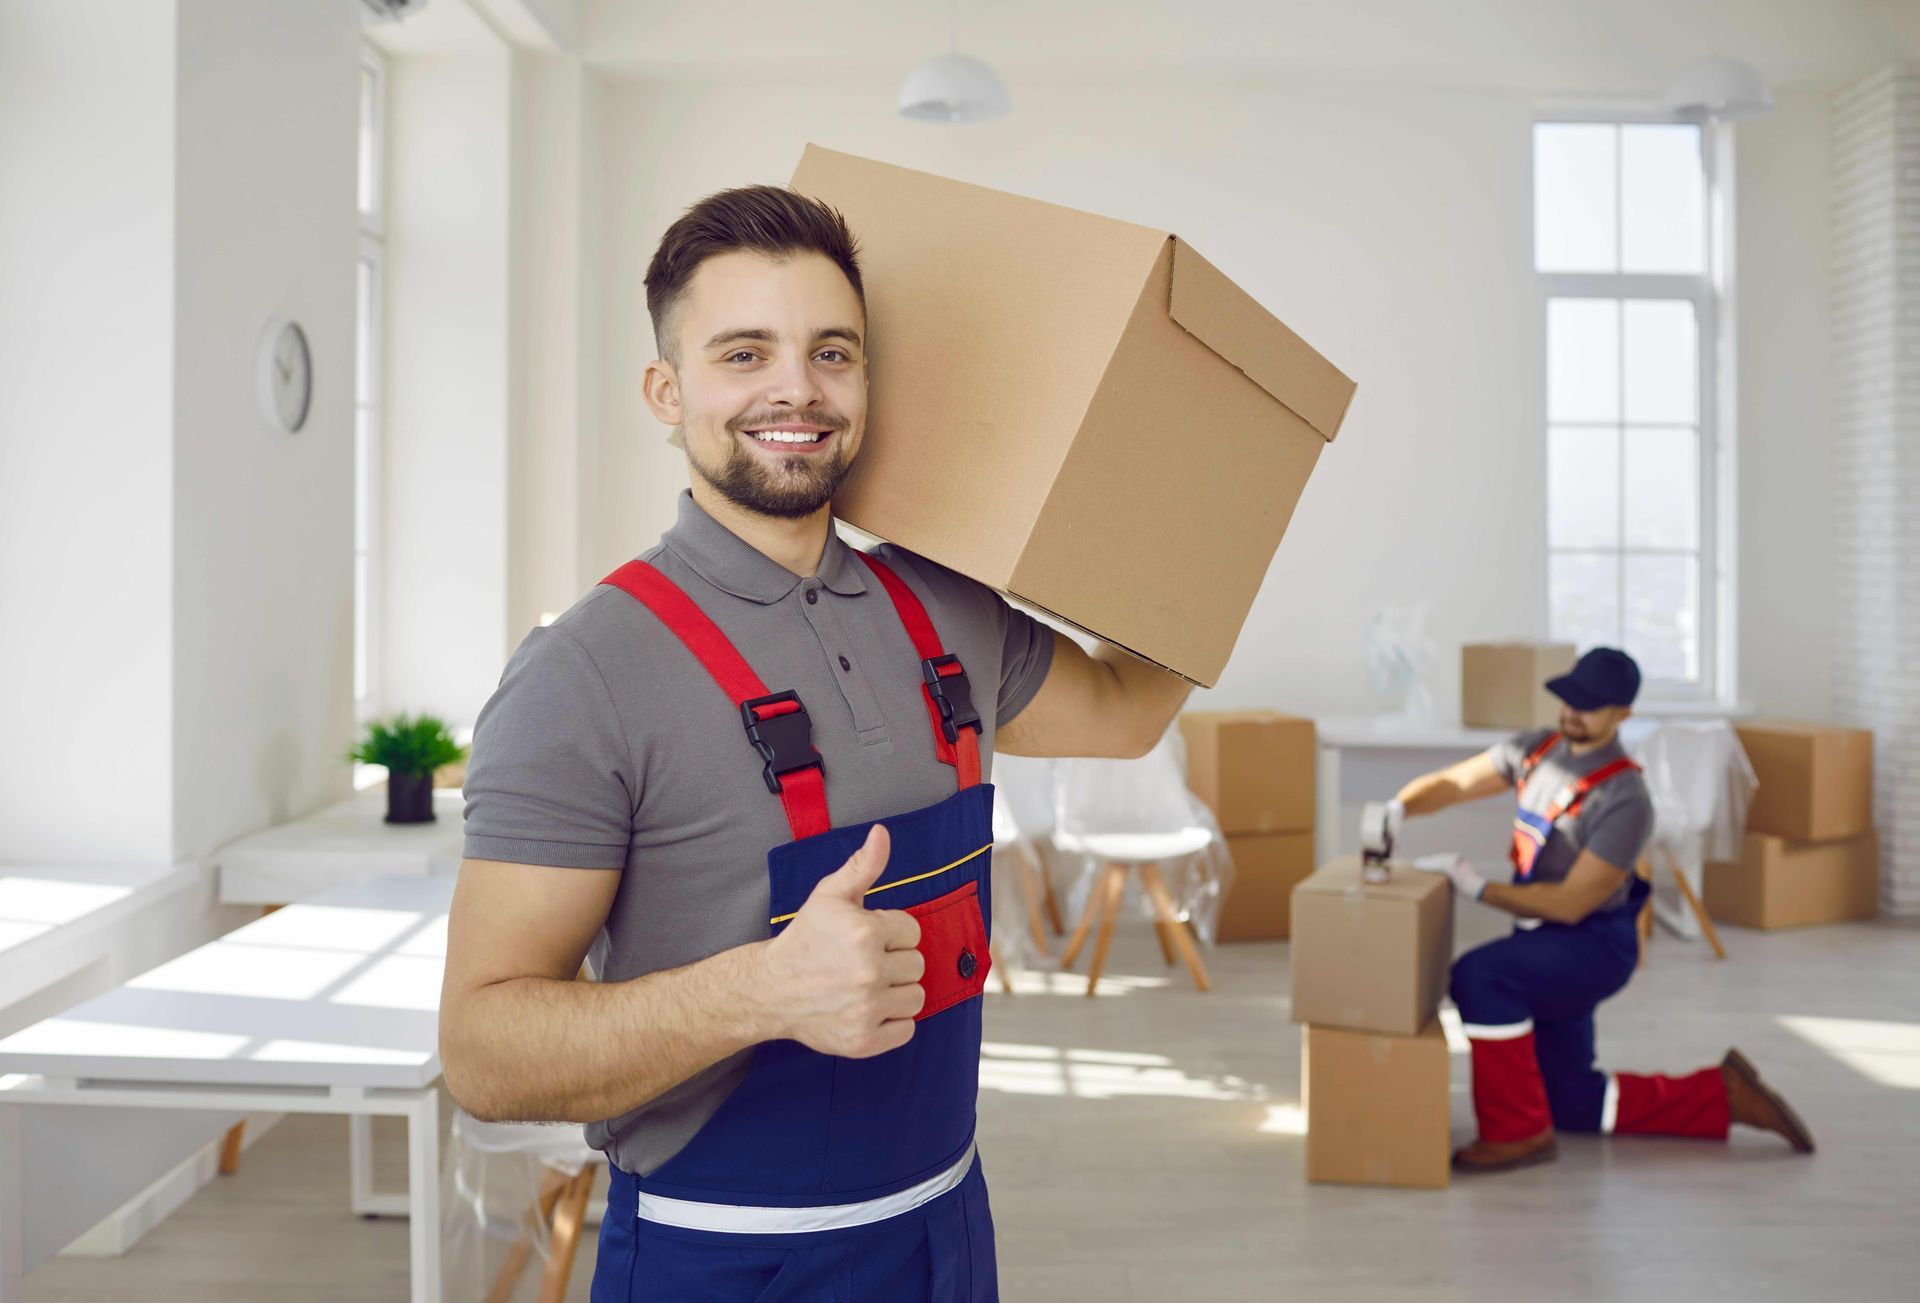 a man is holding a cardboard box and giving a thumbs up